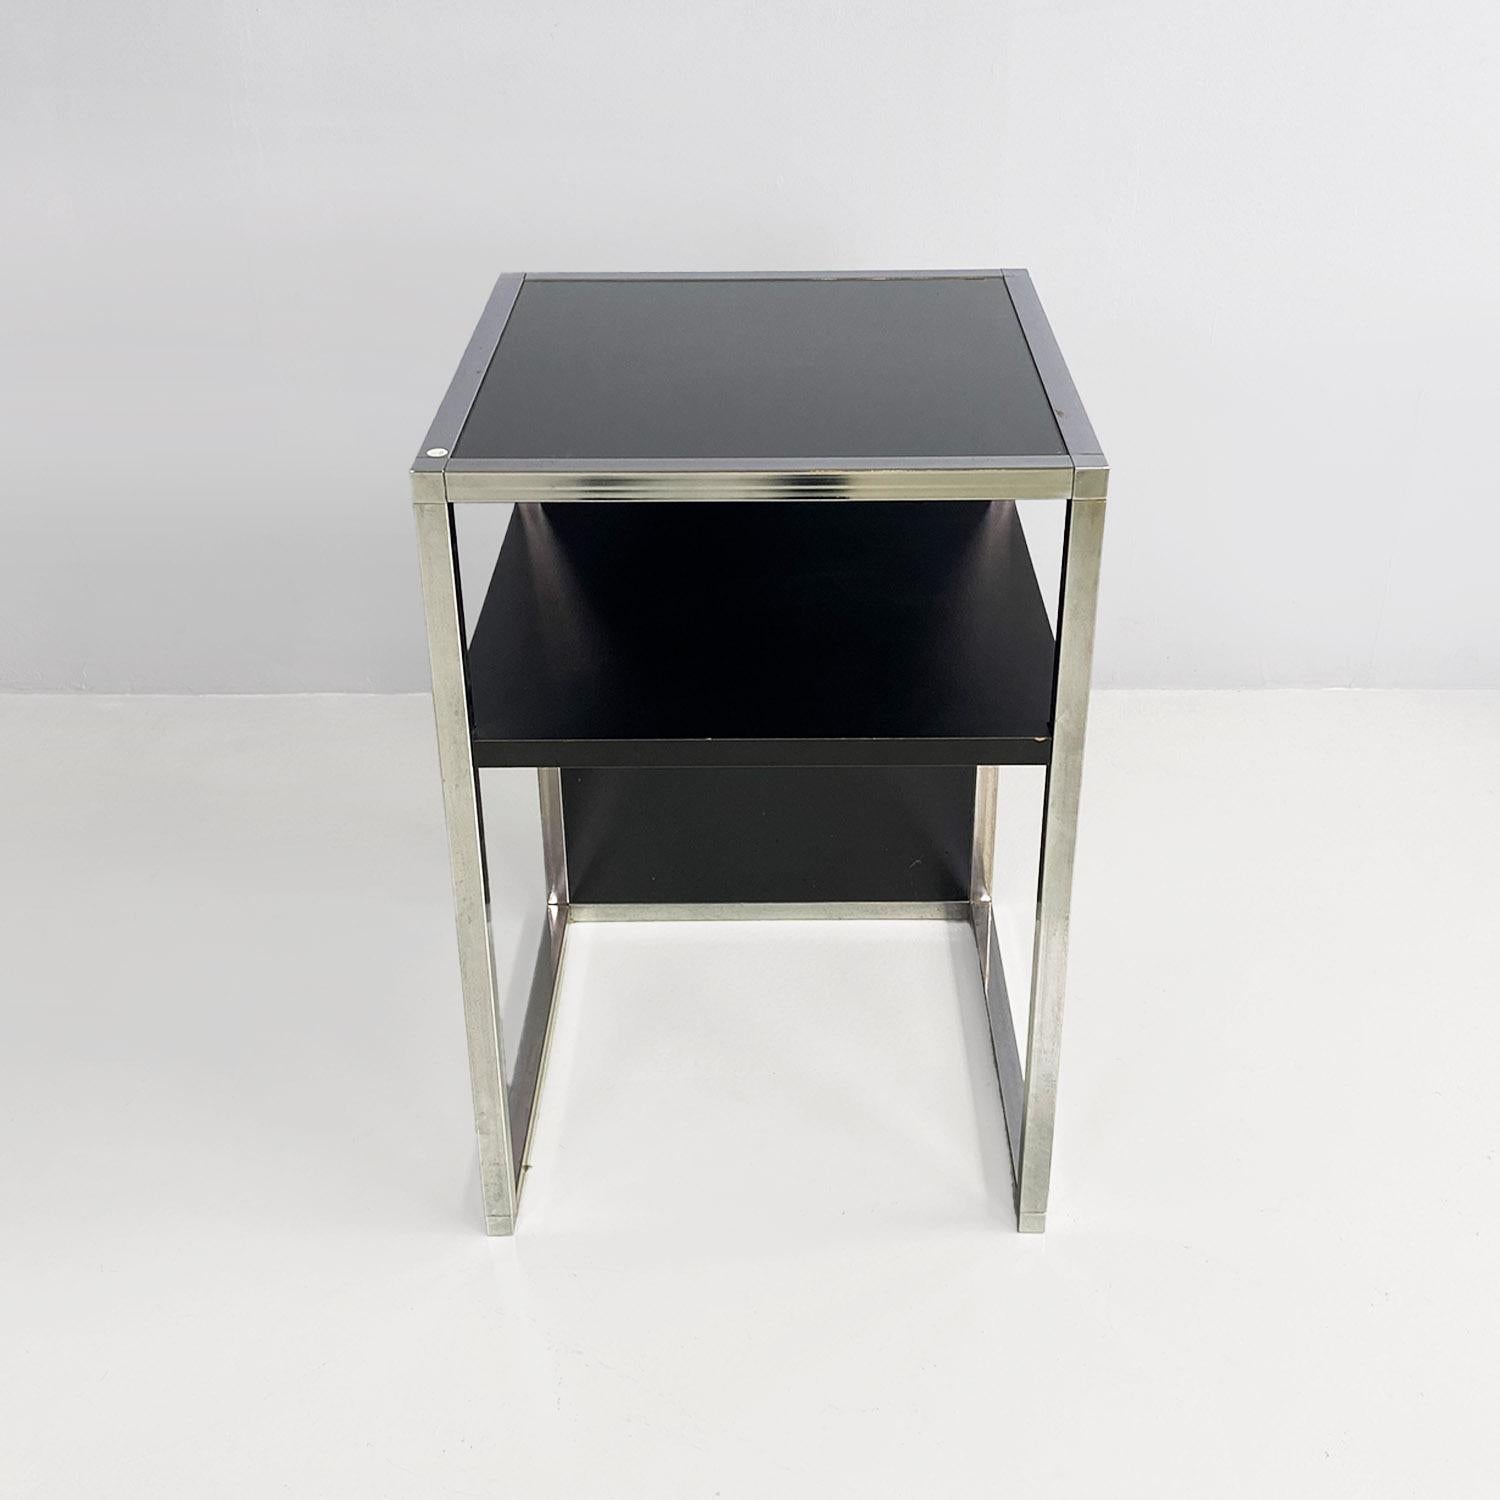 Modern Italian modern chromed steel, wood and glass table for stereo and vinyls, 1990s For Sale